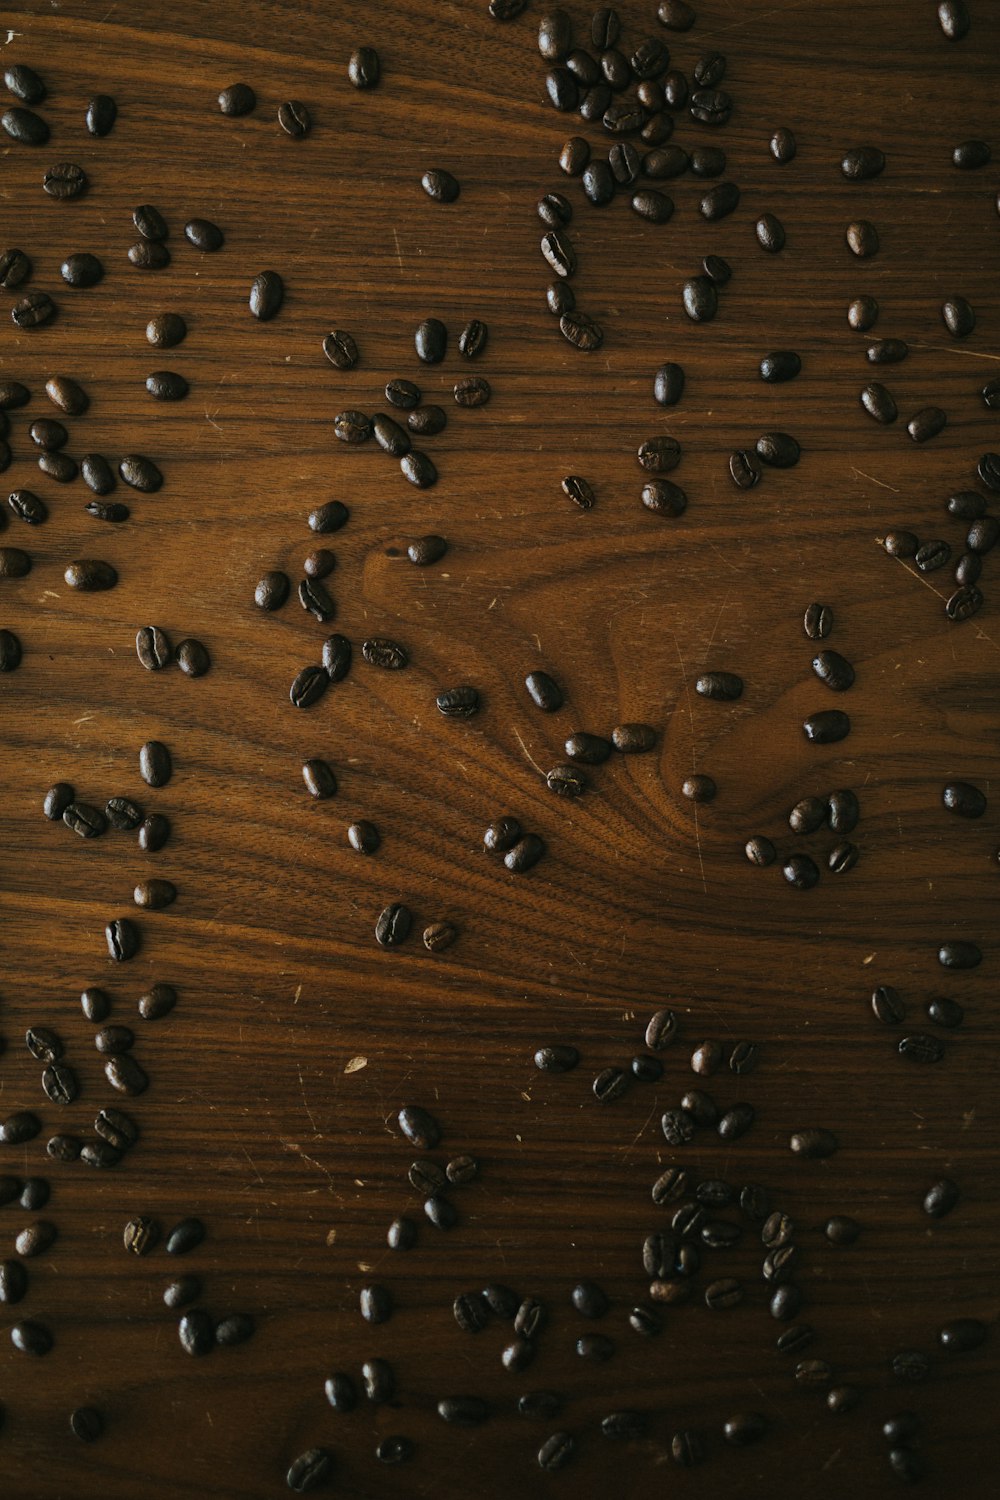 brown and black coffee beans